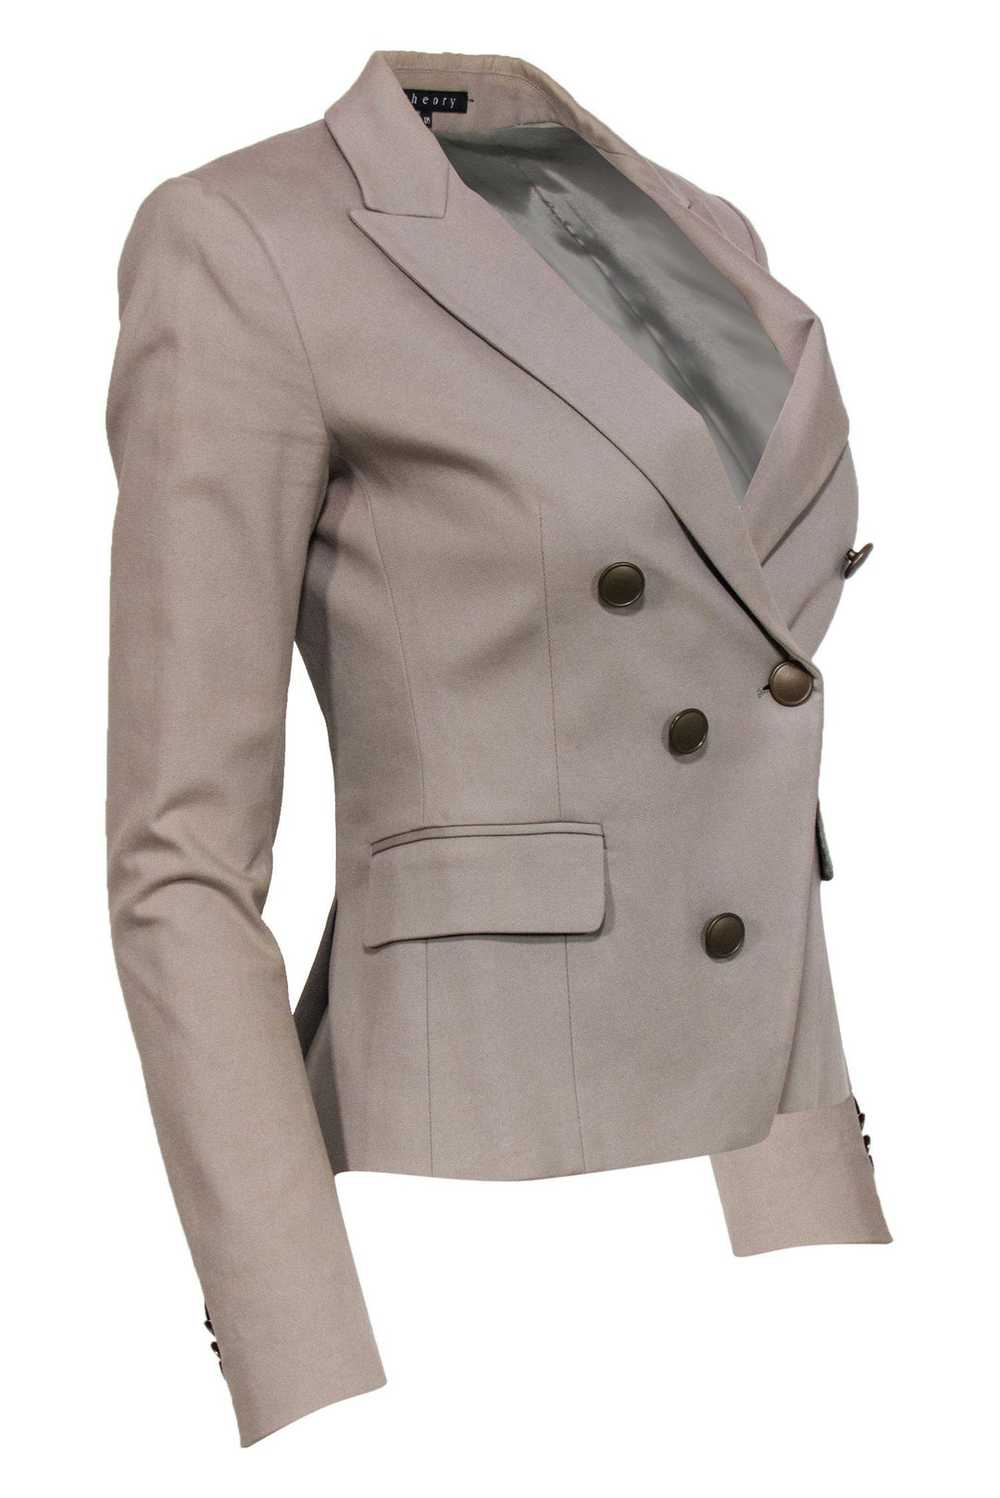 Theory - Taupe Double Breasted Blazer Sz 00 - image 2